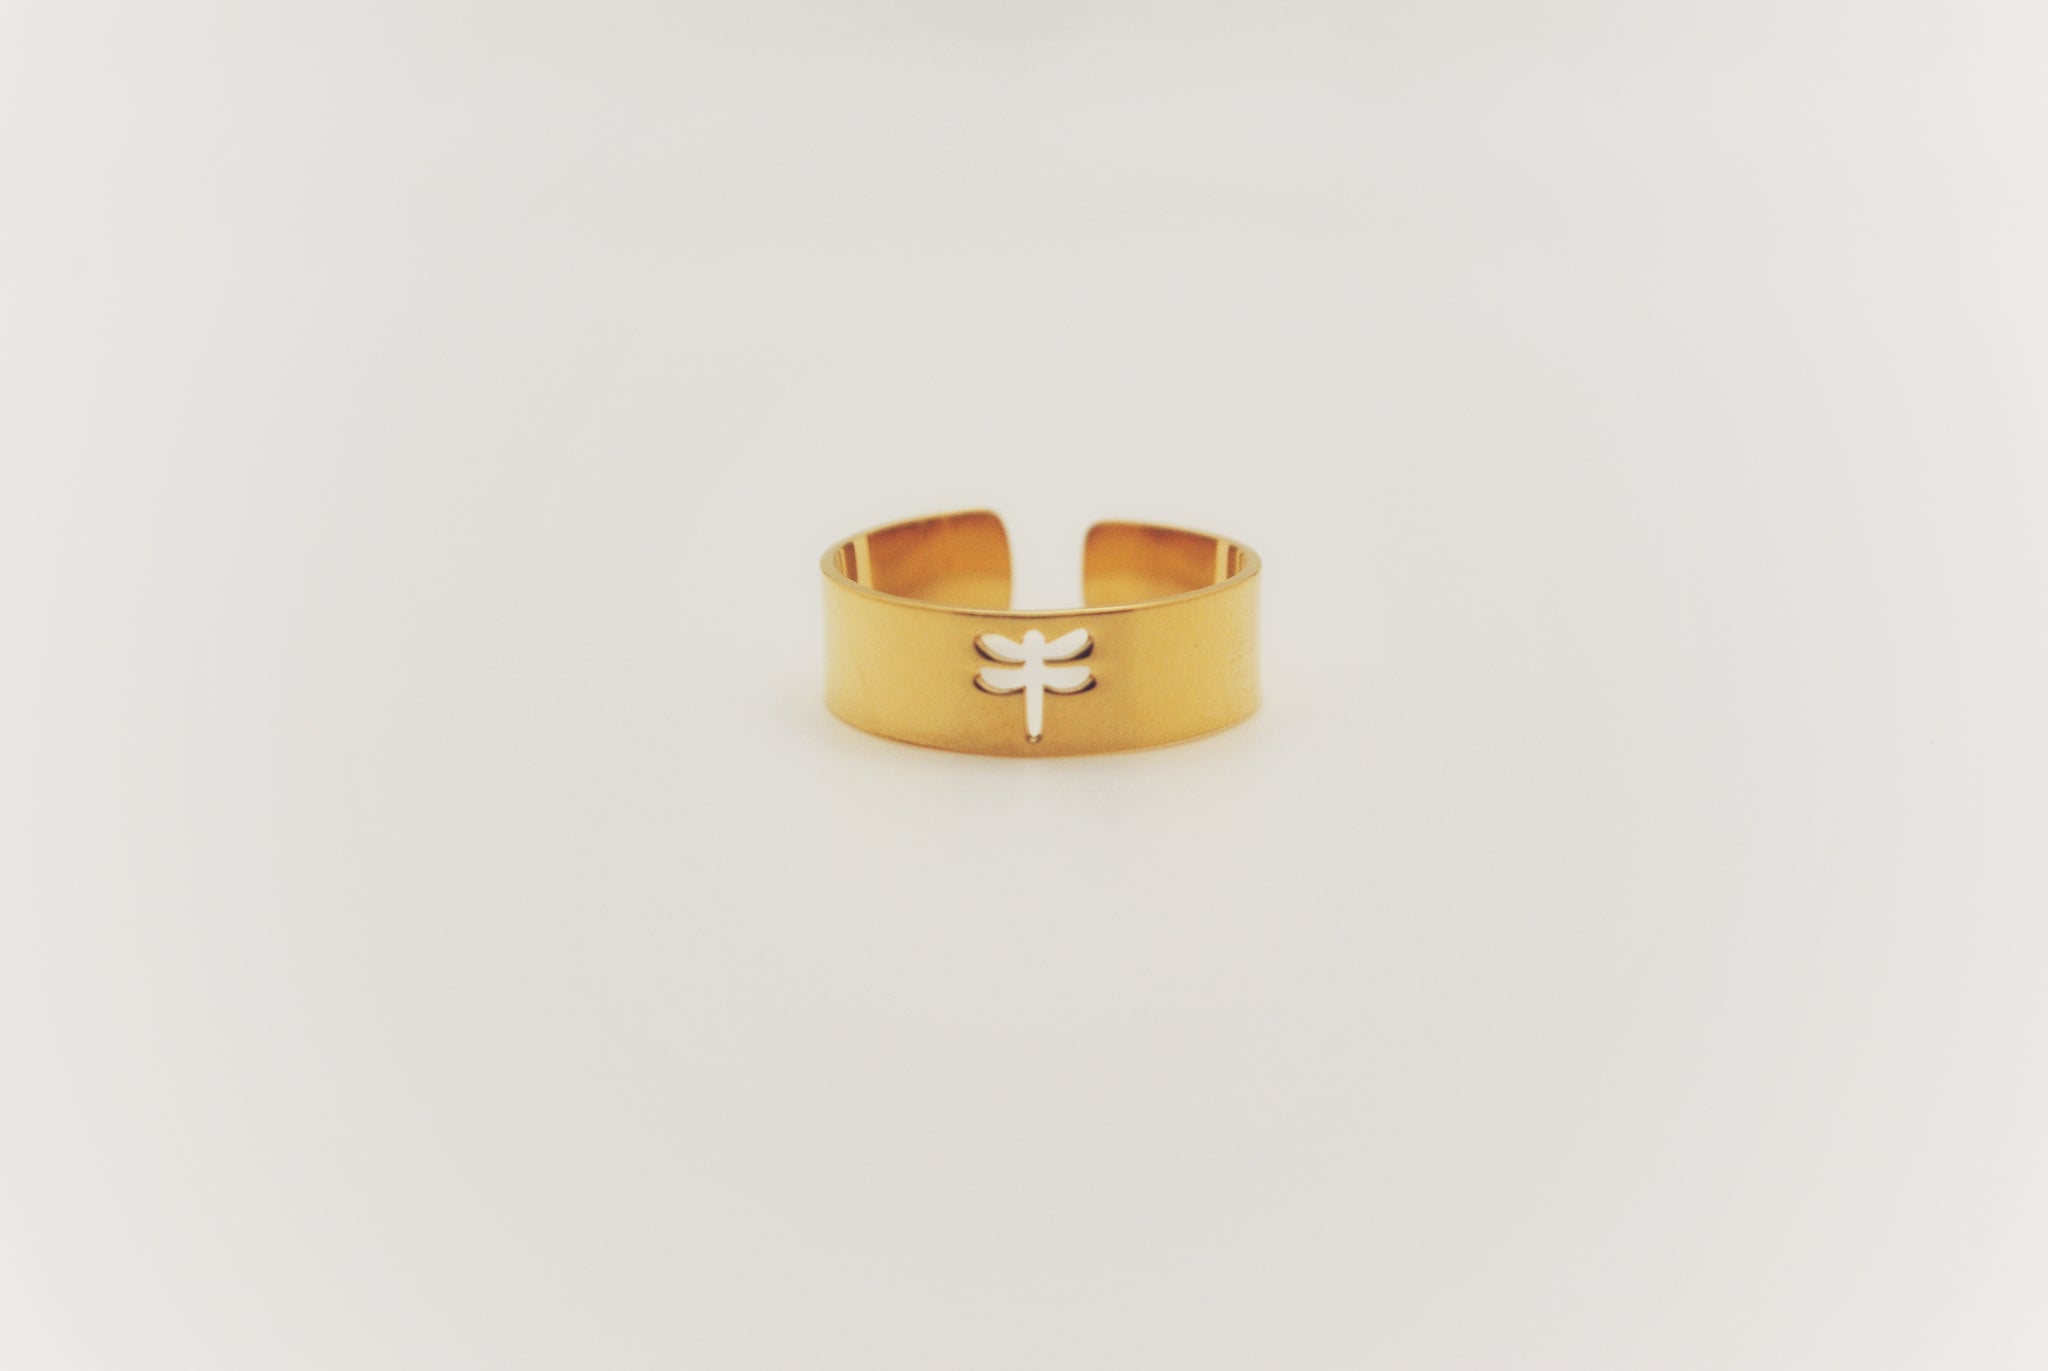 Buterfly/Dragonfly Adjustable Ring